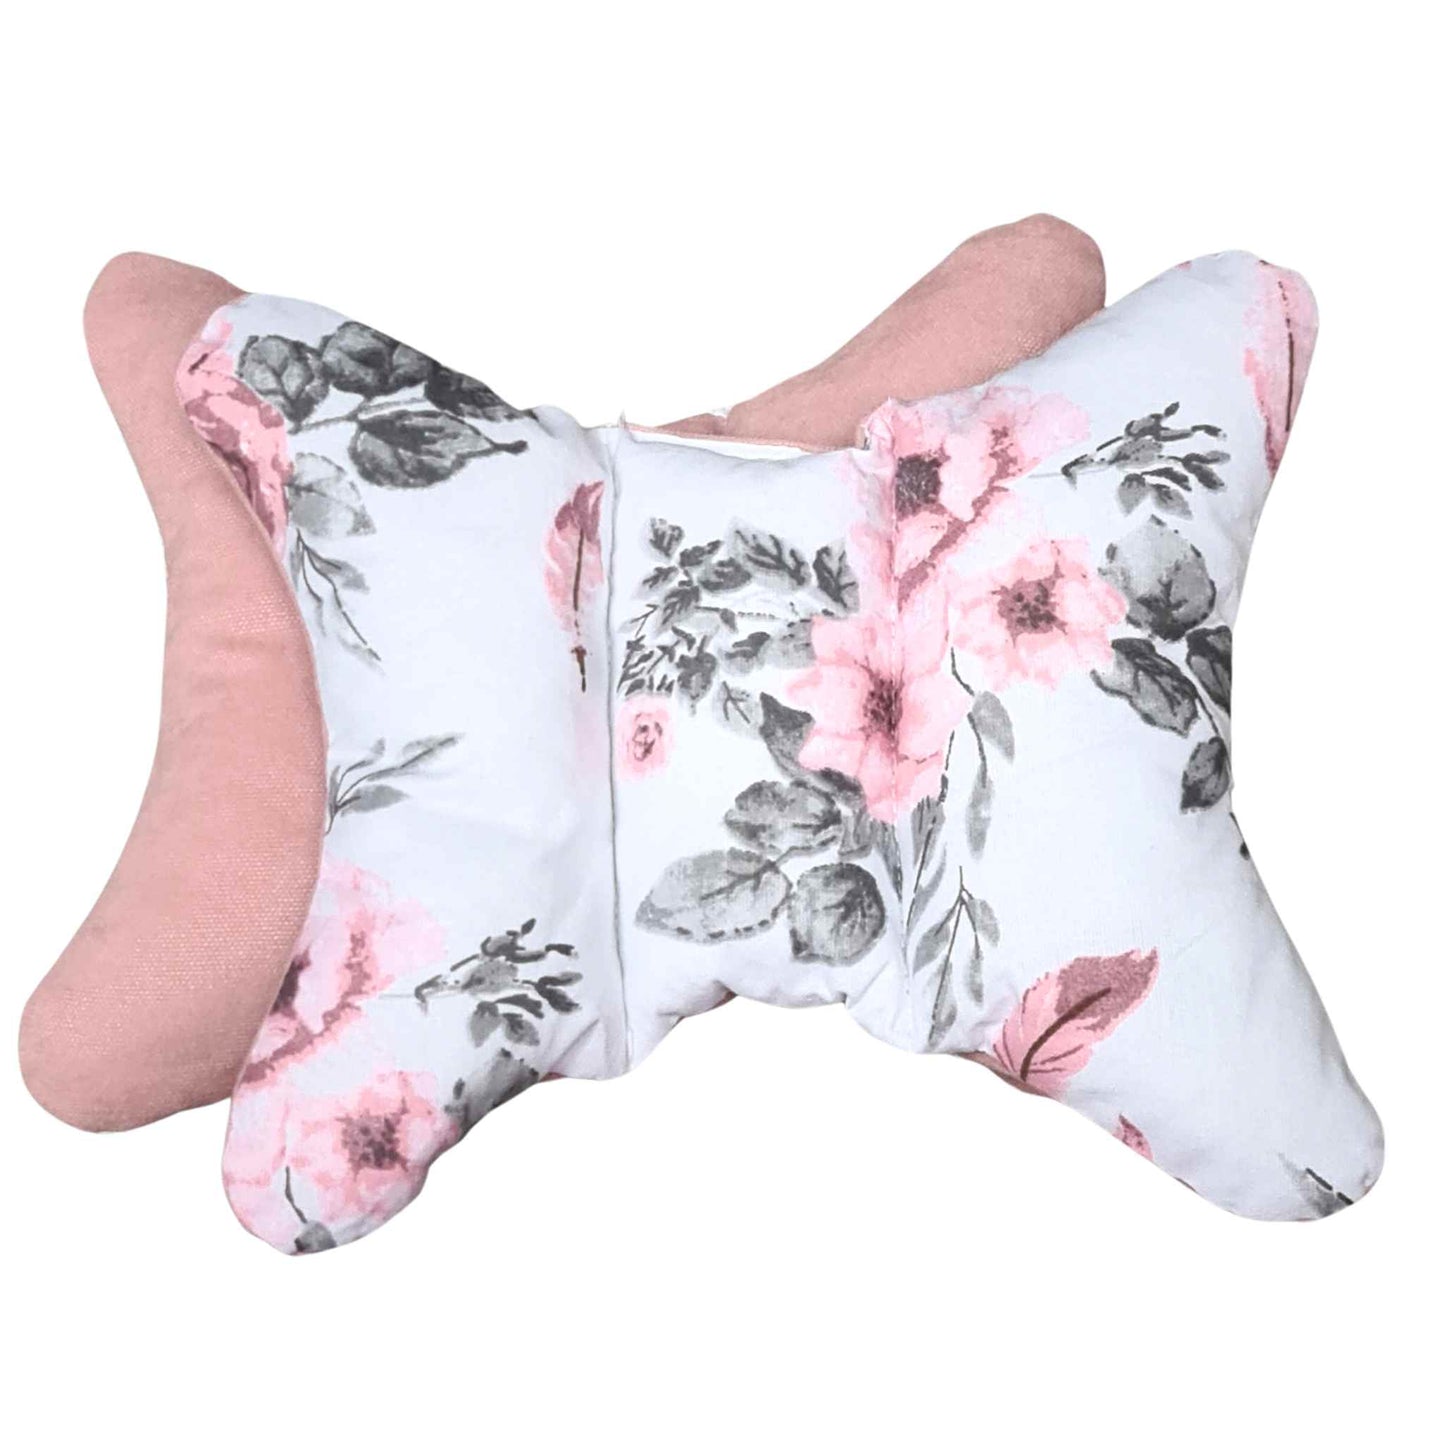 butterfly pillow for baby head support pink with flowers pattern evcushy 